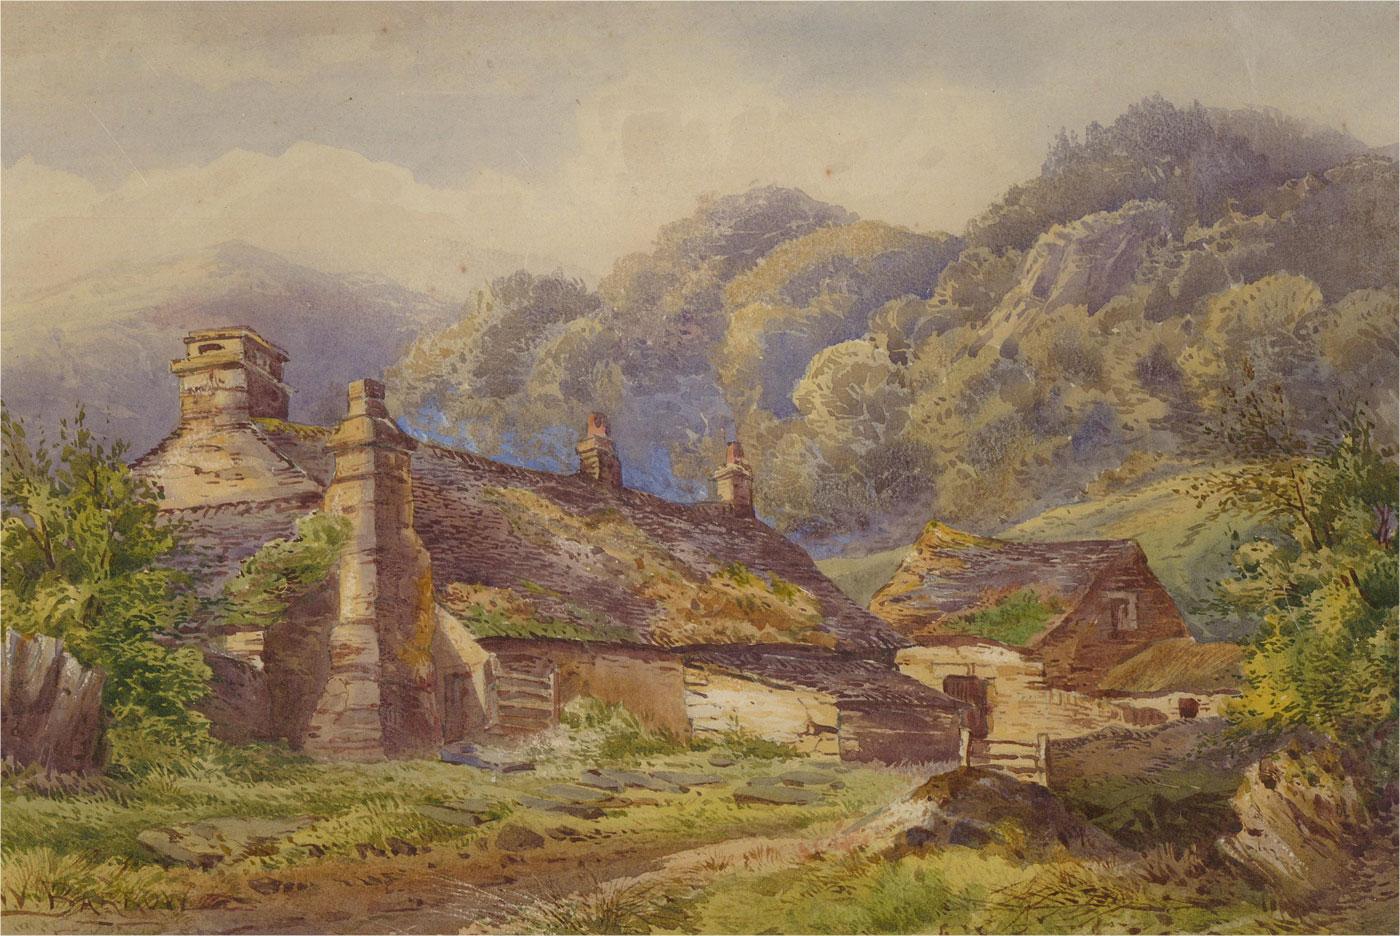 A fine British School, late 19th century watercolour, depicting a hillside cottage in a rural setting. The artist has delicately added detail to the cottage roof tiles and surrounding foliage. Signed to the lower left. Presented in a muted metallic